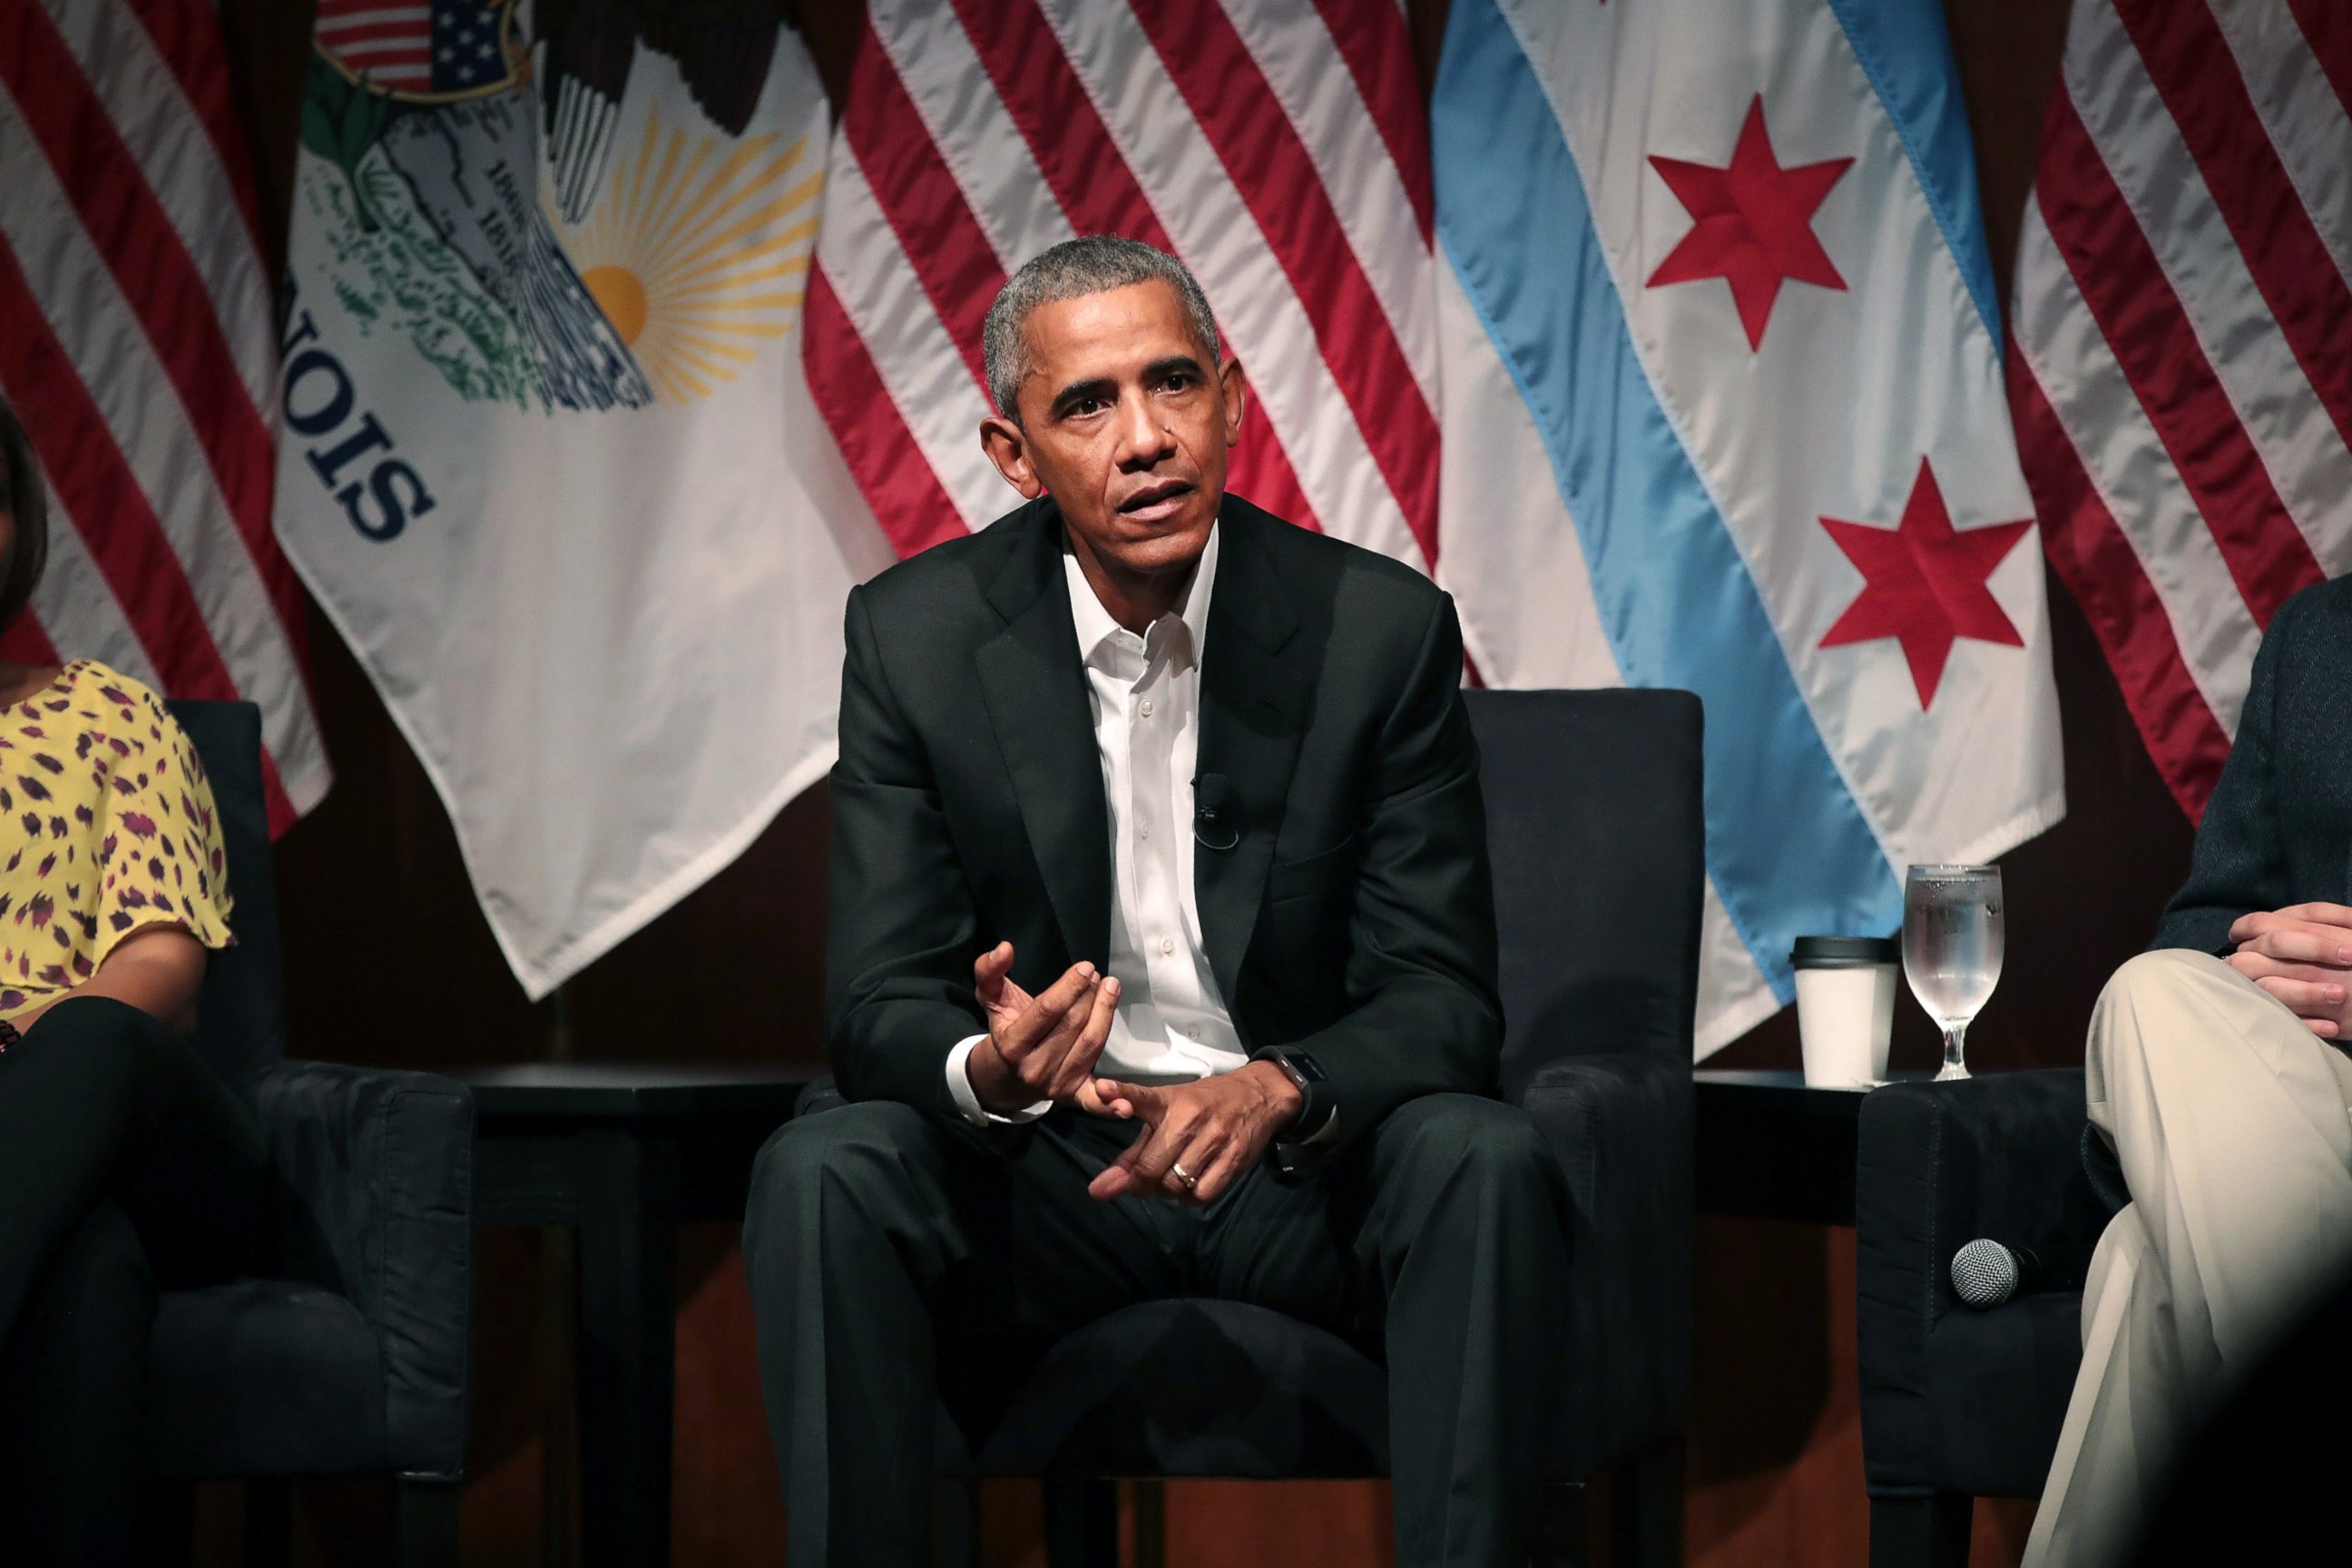 PHOTO: Former President Barack Obama visits with youth leaders at the University of Chicago to help promote community organizing, April 24, 2017, in Chicago.  